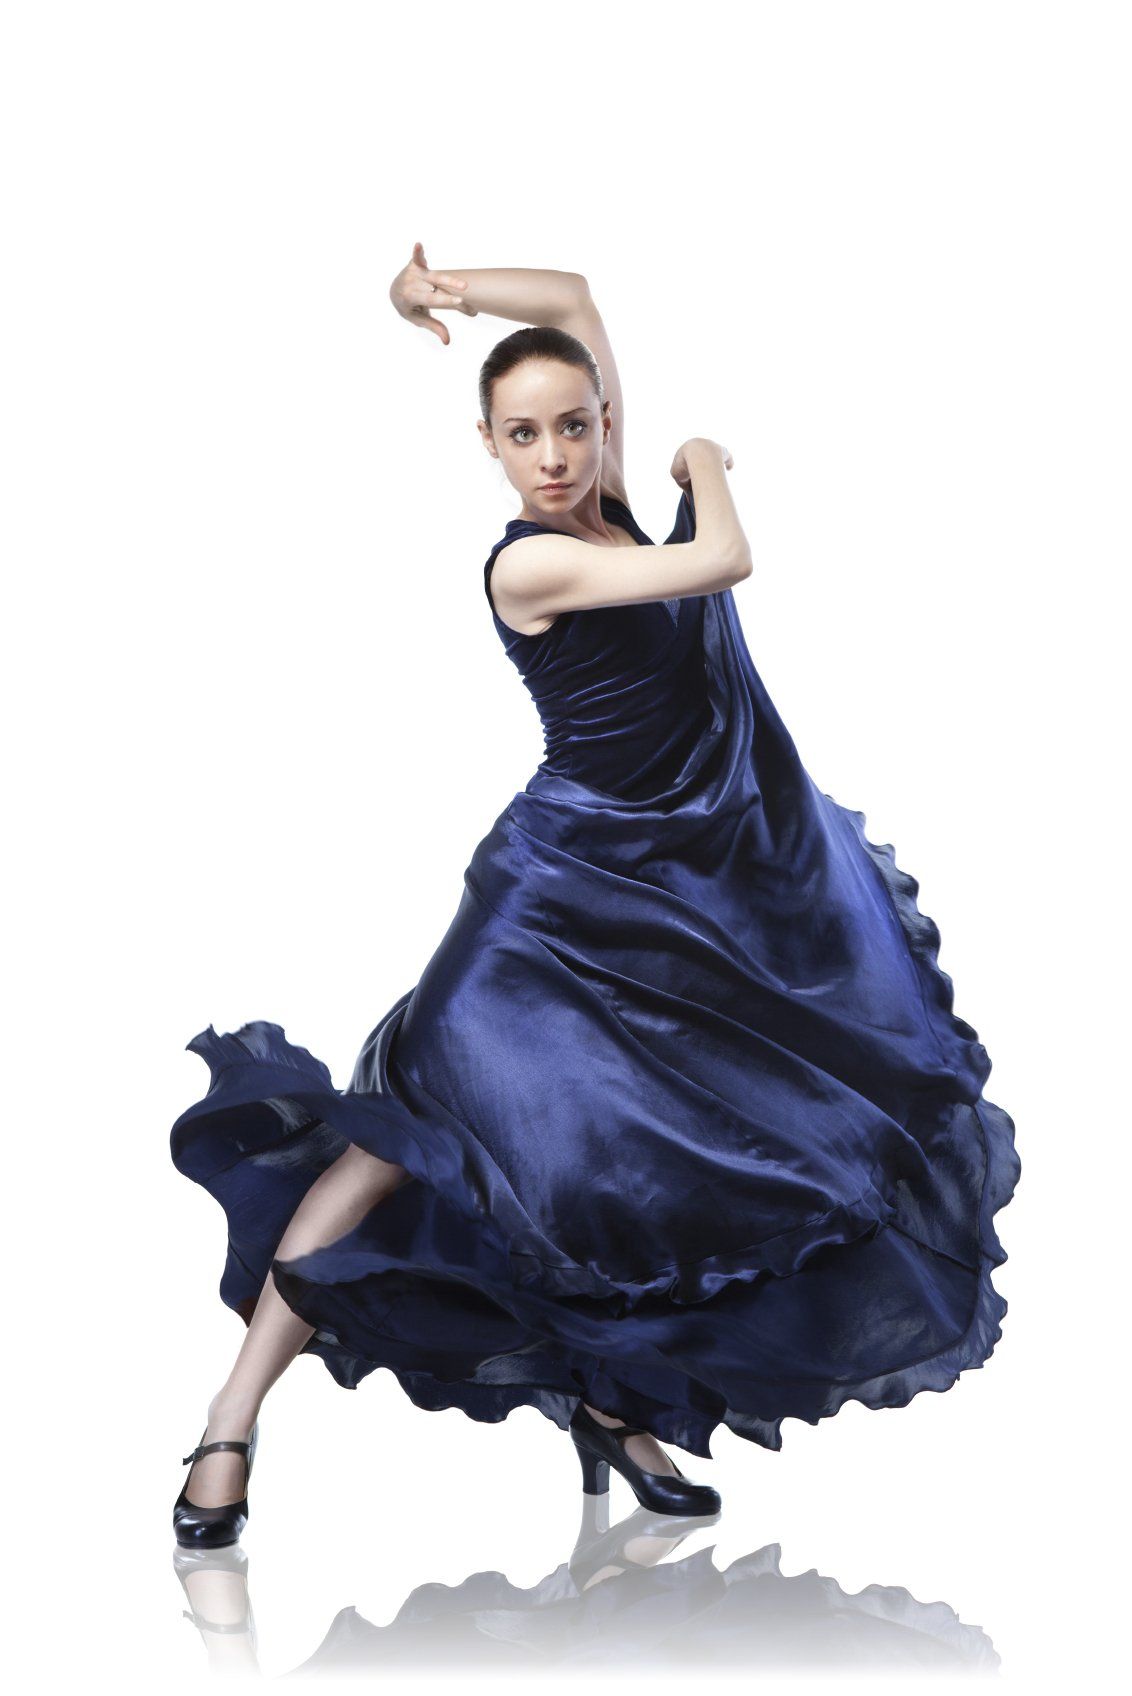 Young dancer in a full, flowing, blue dress